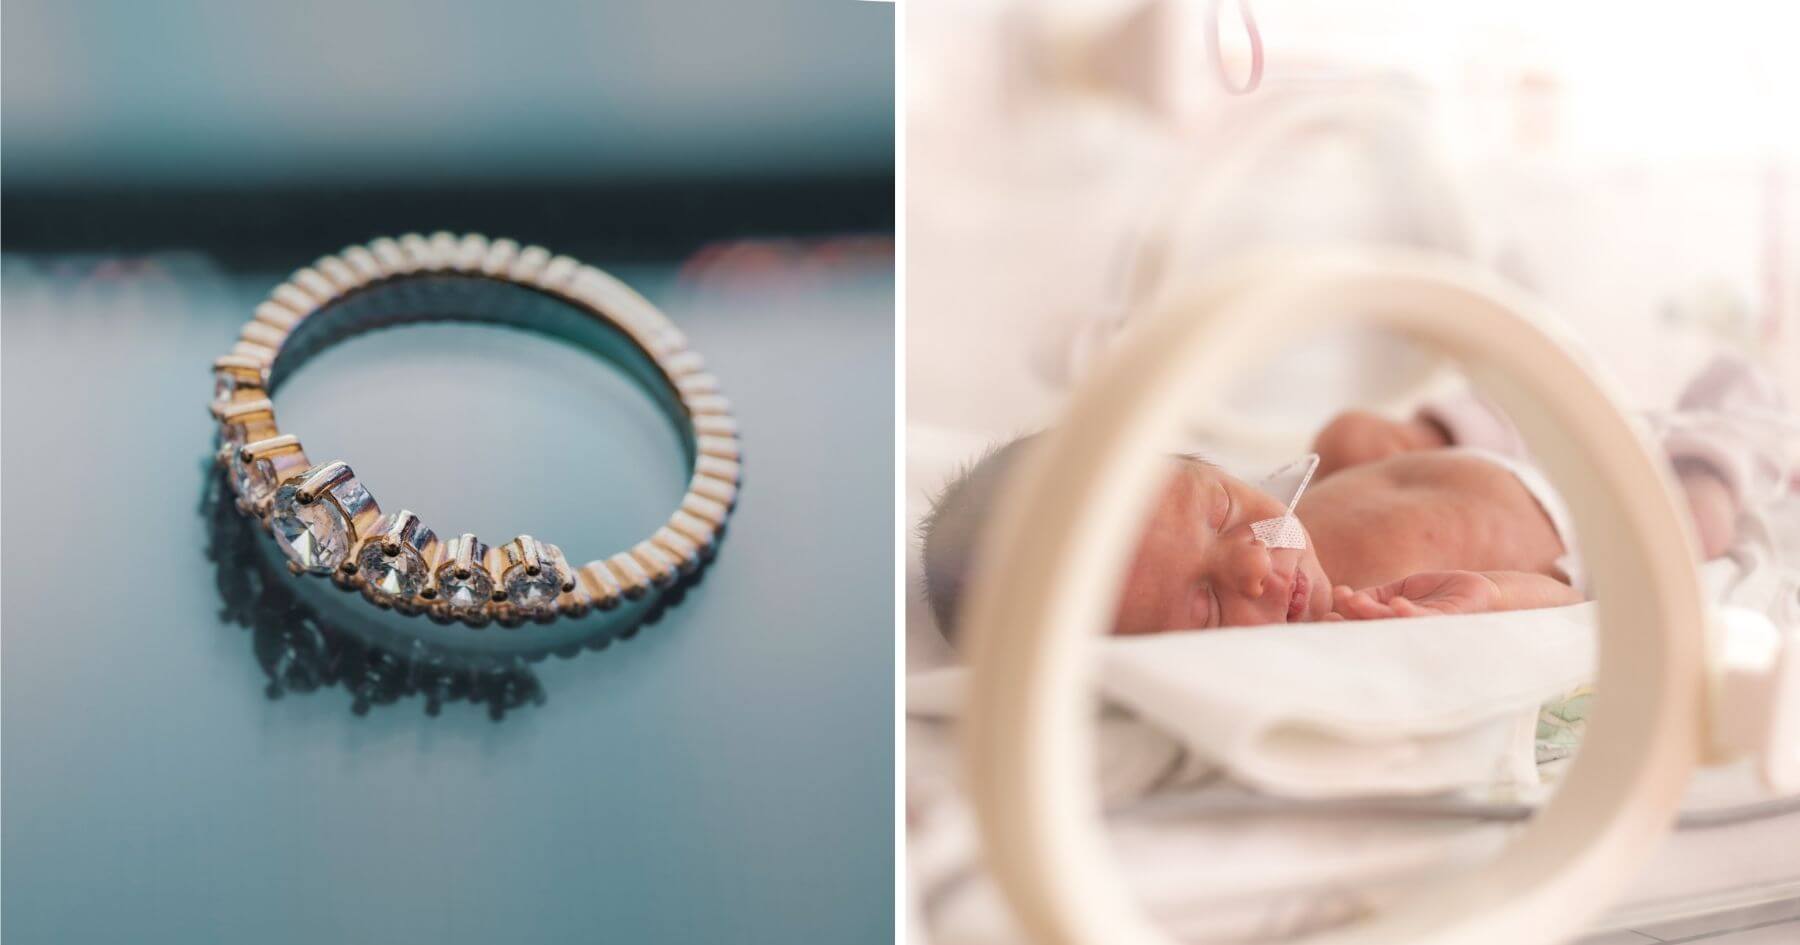 Tiny premature baby born so small she could wear her dad's wedding ring as a bracelet